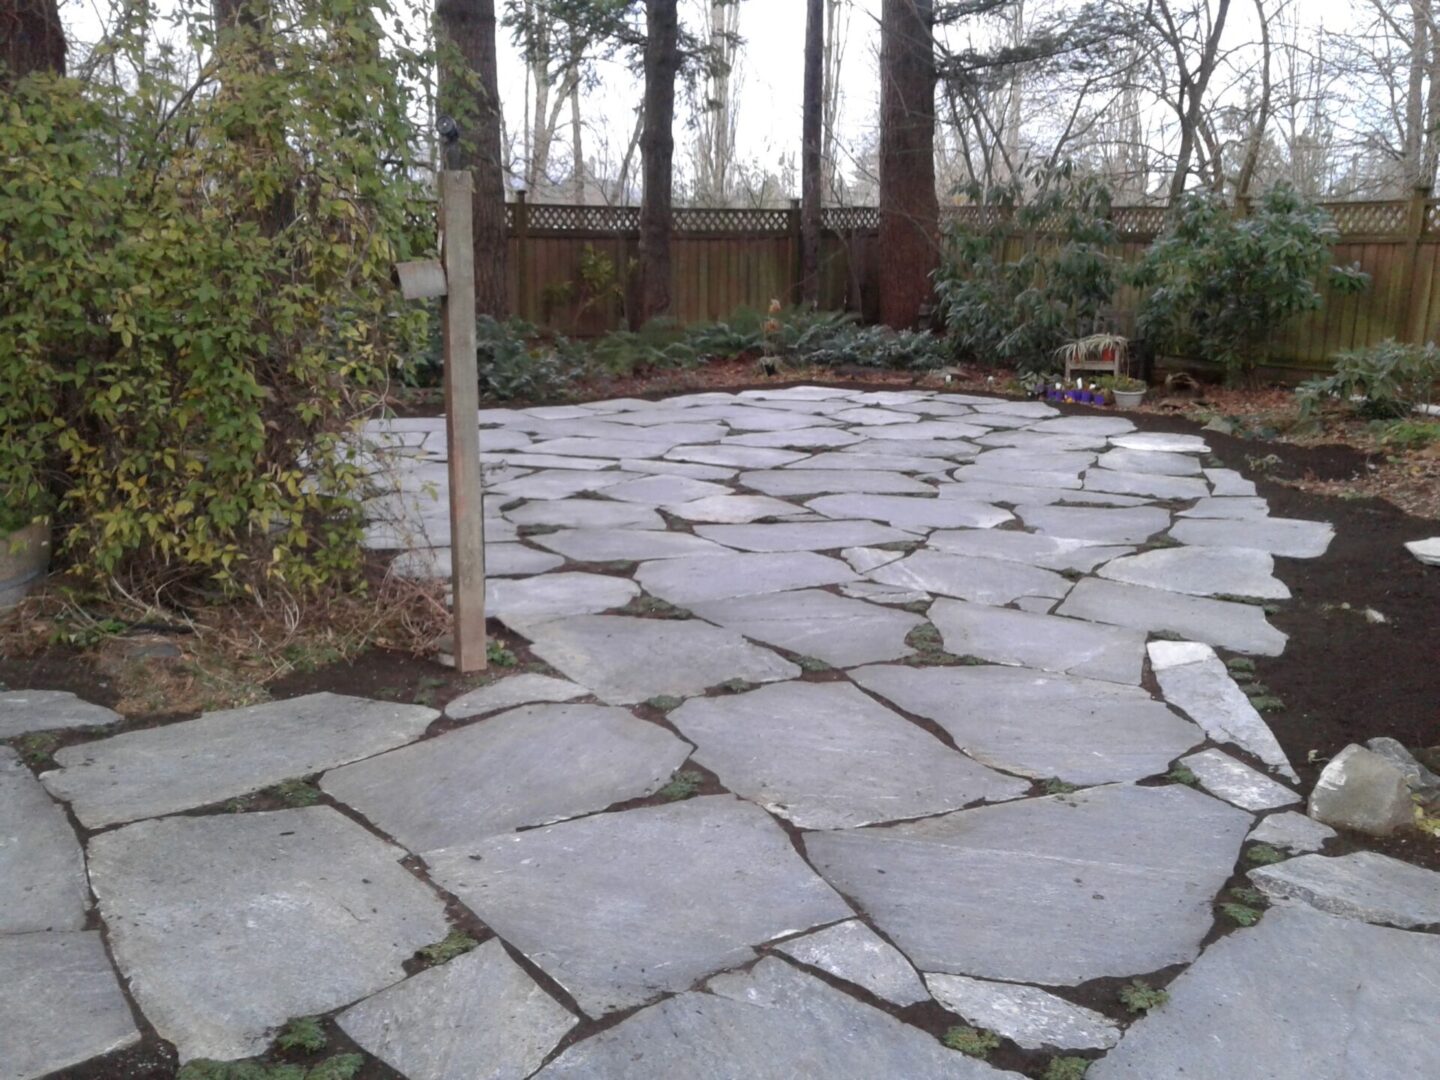 A winding stone pathway bordered by lush greenery and trees, leading through a serene garden.